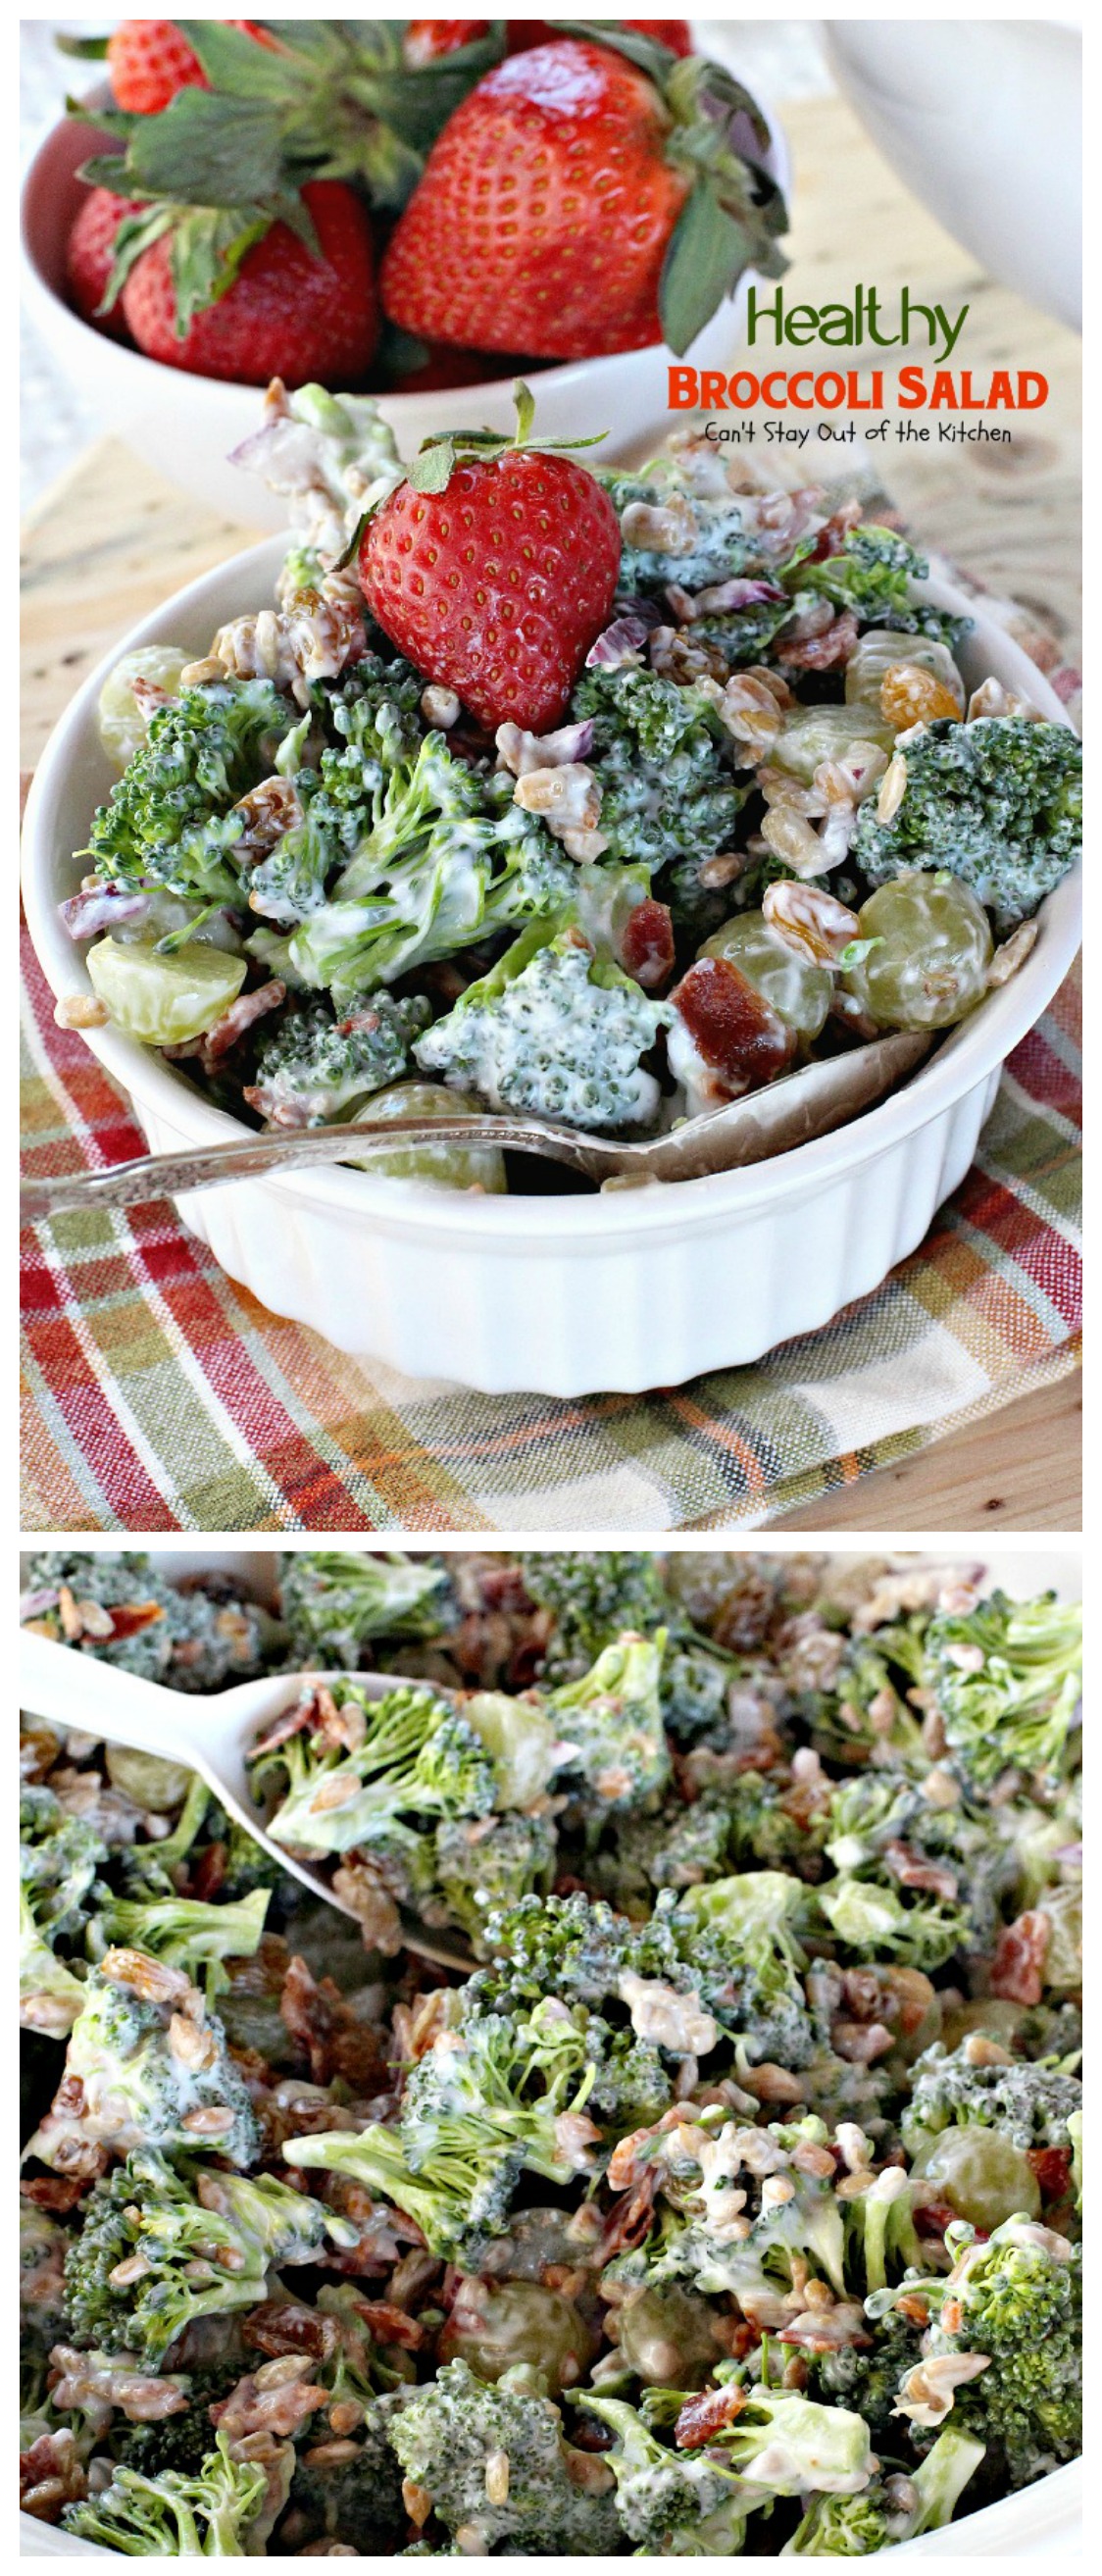 Healthy Broccoli Salad - Can't Stay Out of the Kitchen